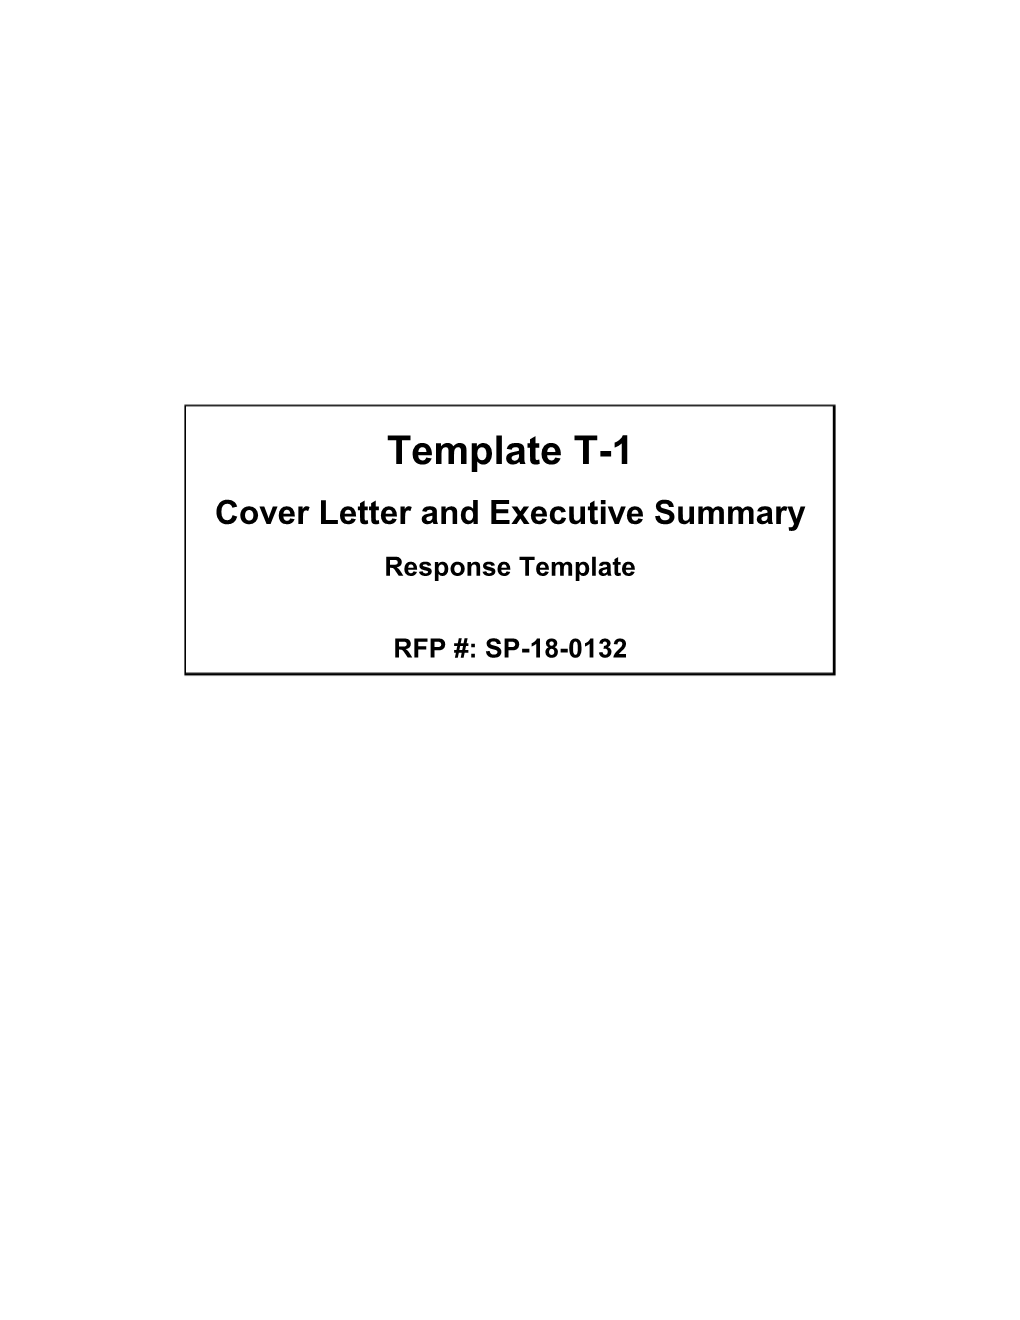 Template T-1 Cover Letter and Executive Summary Response Template